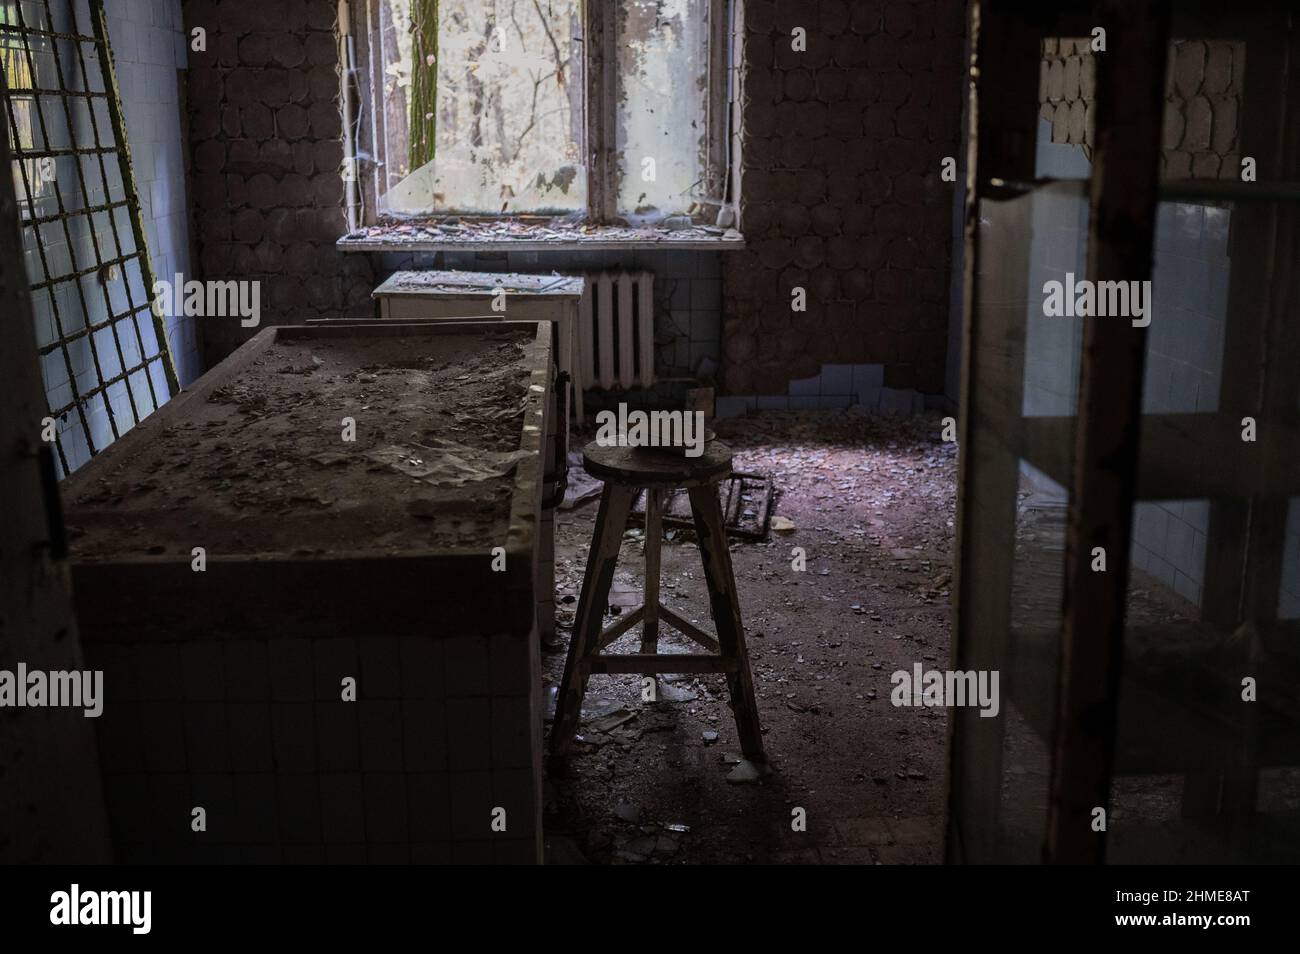 The autopsy table in the abandoned morgue in Pripyat, Ukraine near the Chernobyl Nuclear Power Plant. Stock Photo